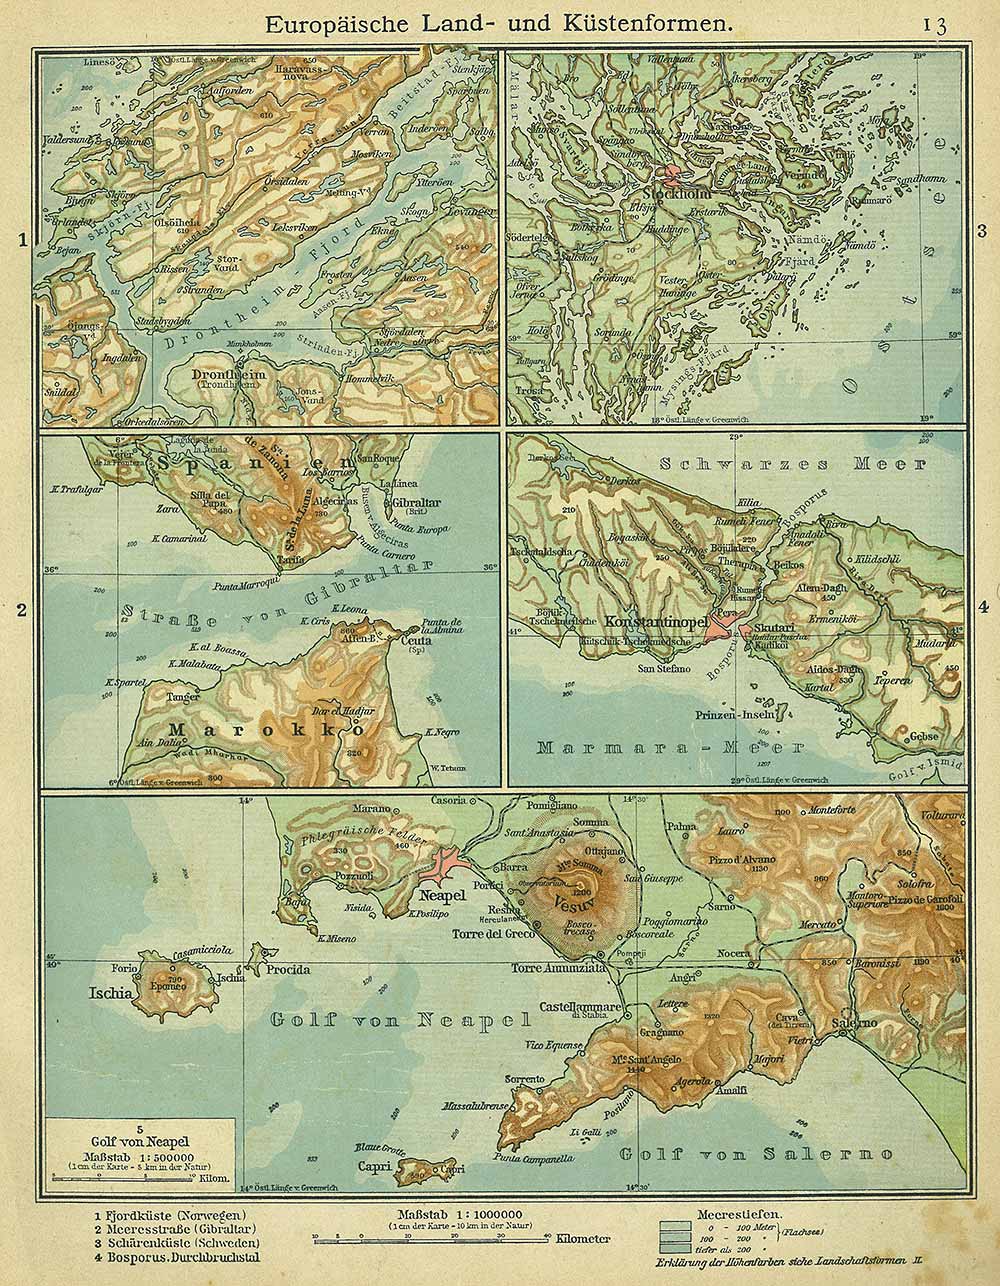 European land and coastal forms, Andrees 'Berliner Schul-Atlas', 1916, page 13, published size to print borders 20.29 cm wide by 27.07 cm high.